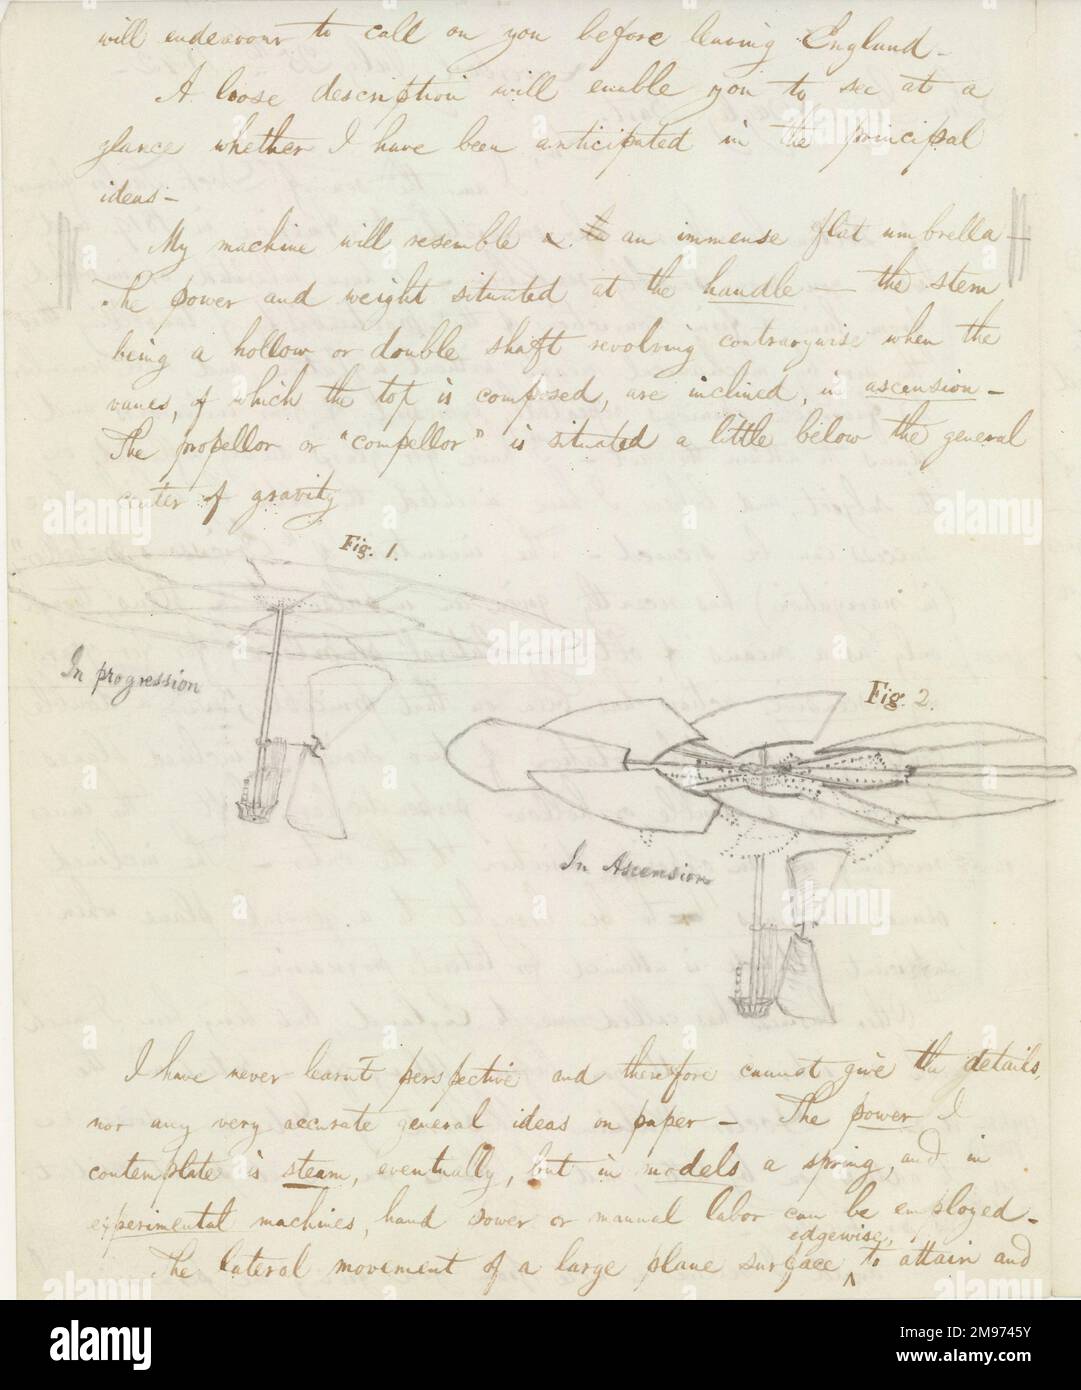 Page of letter from Robert B. Taylor to Sir George Cayley, 25 July 1842. Stock Photo